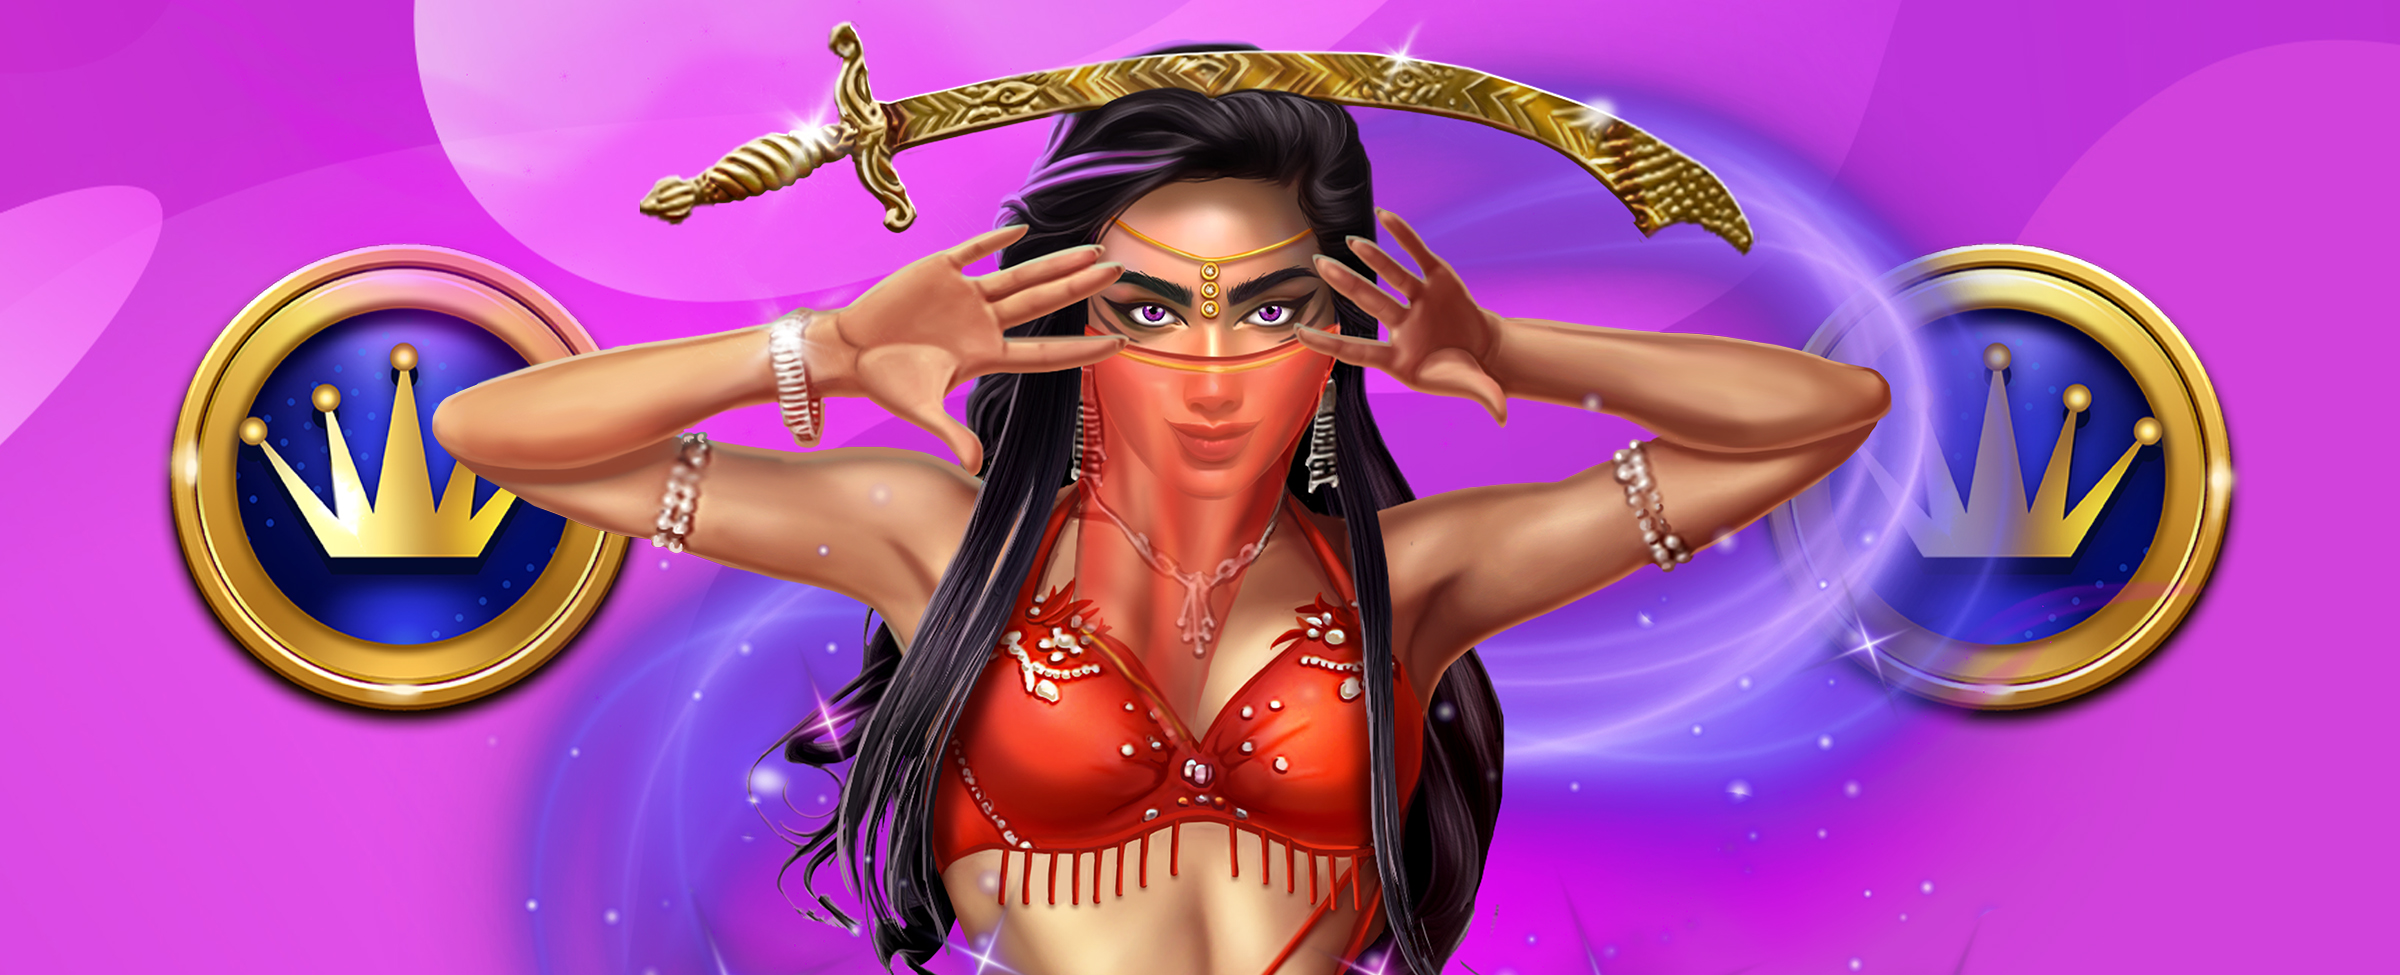 The 3D-animated Arabian princess from the SlotsLV slot game, Oasis Dreams Hot Drop Jackpots, is seen from the waist up, with long black hair and piercing black eyes and jewelry on her arms, wrists and forehead. Above her is a gold sword, with a dizzying blue swoosh coming from behind. To the princess’s left and right are the SlotsLV Hot Drop Jackpot symbols.